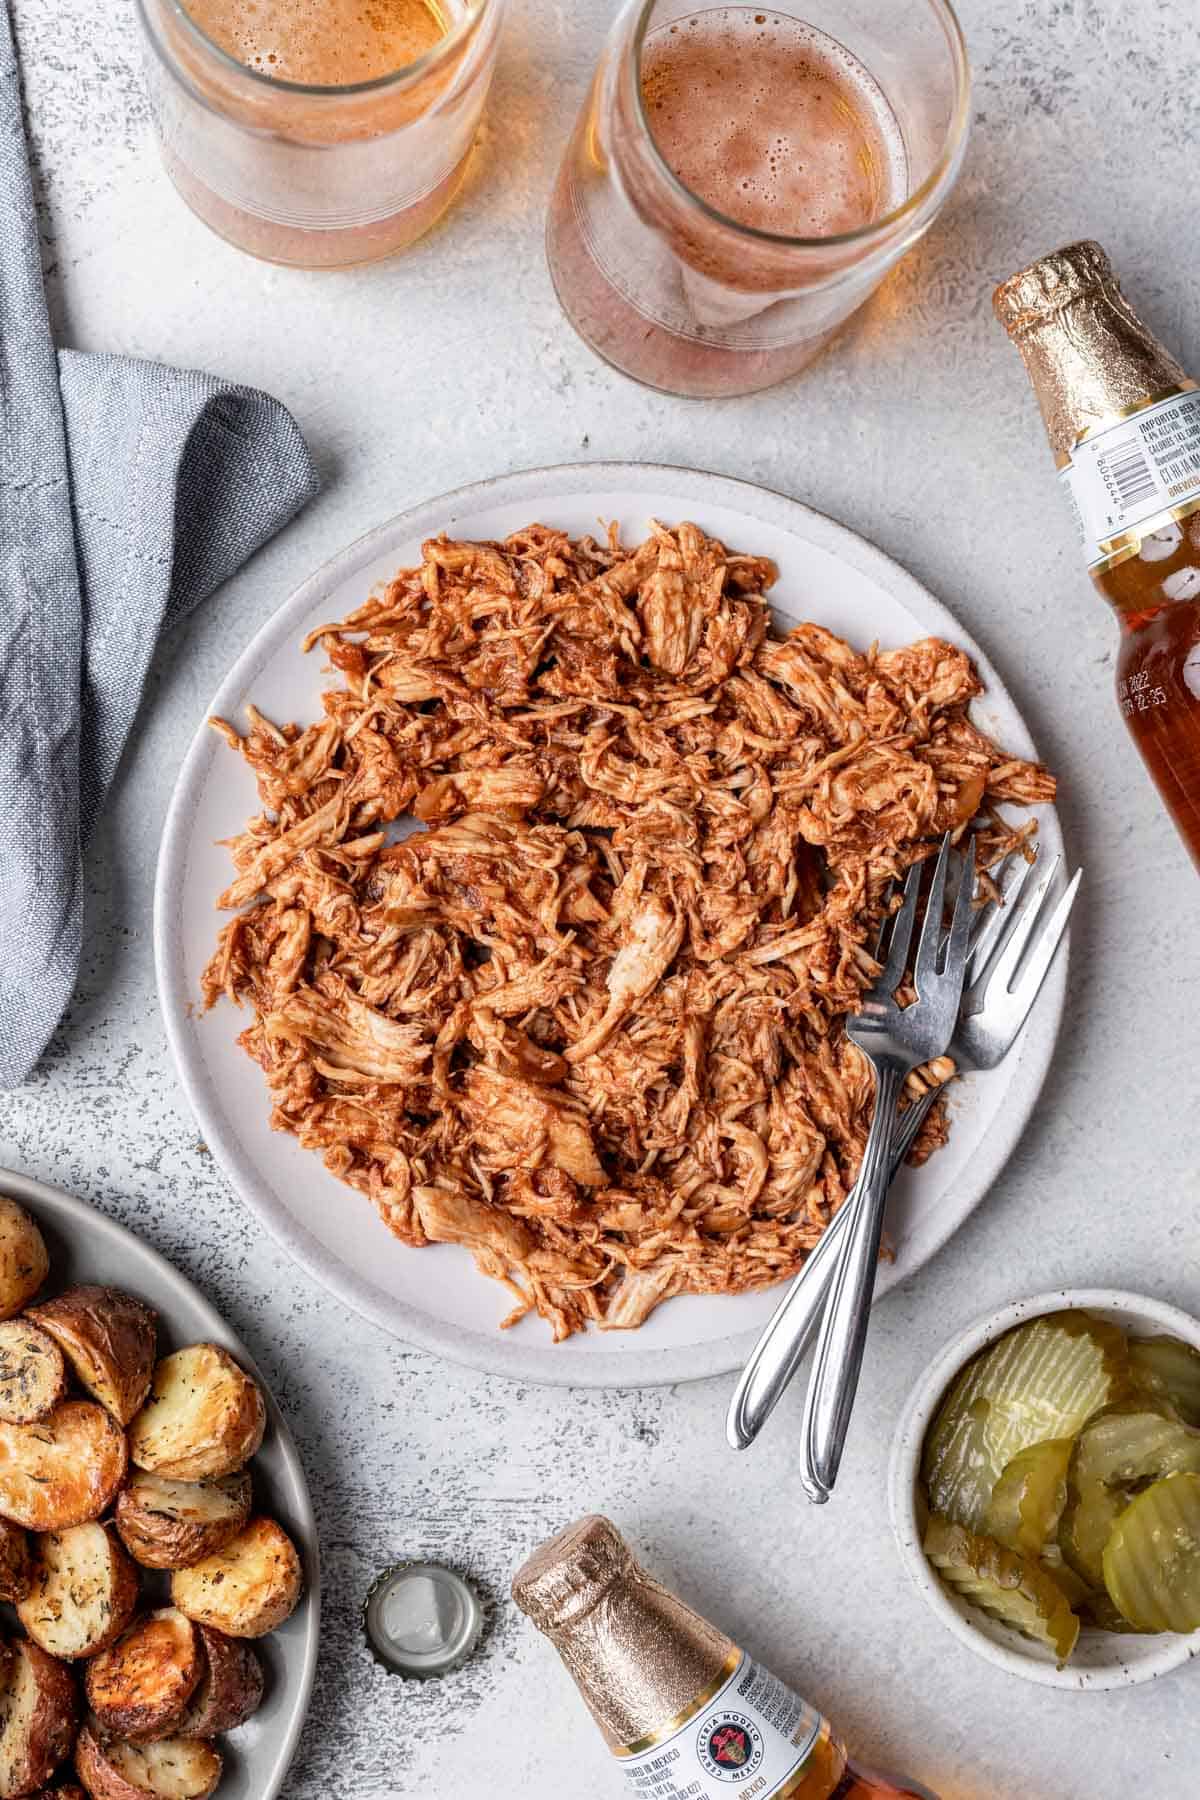 Instant pot bbq pulled chicken on a plate with two forks and a side of pickles.